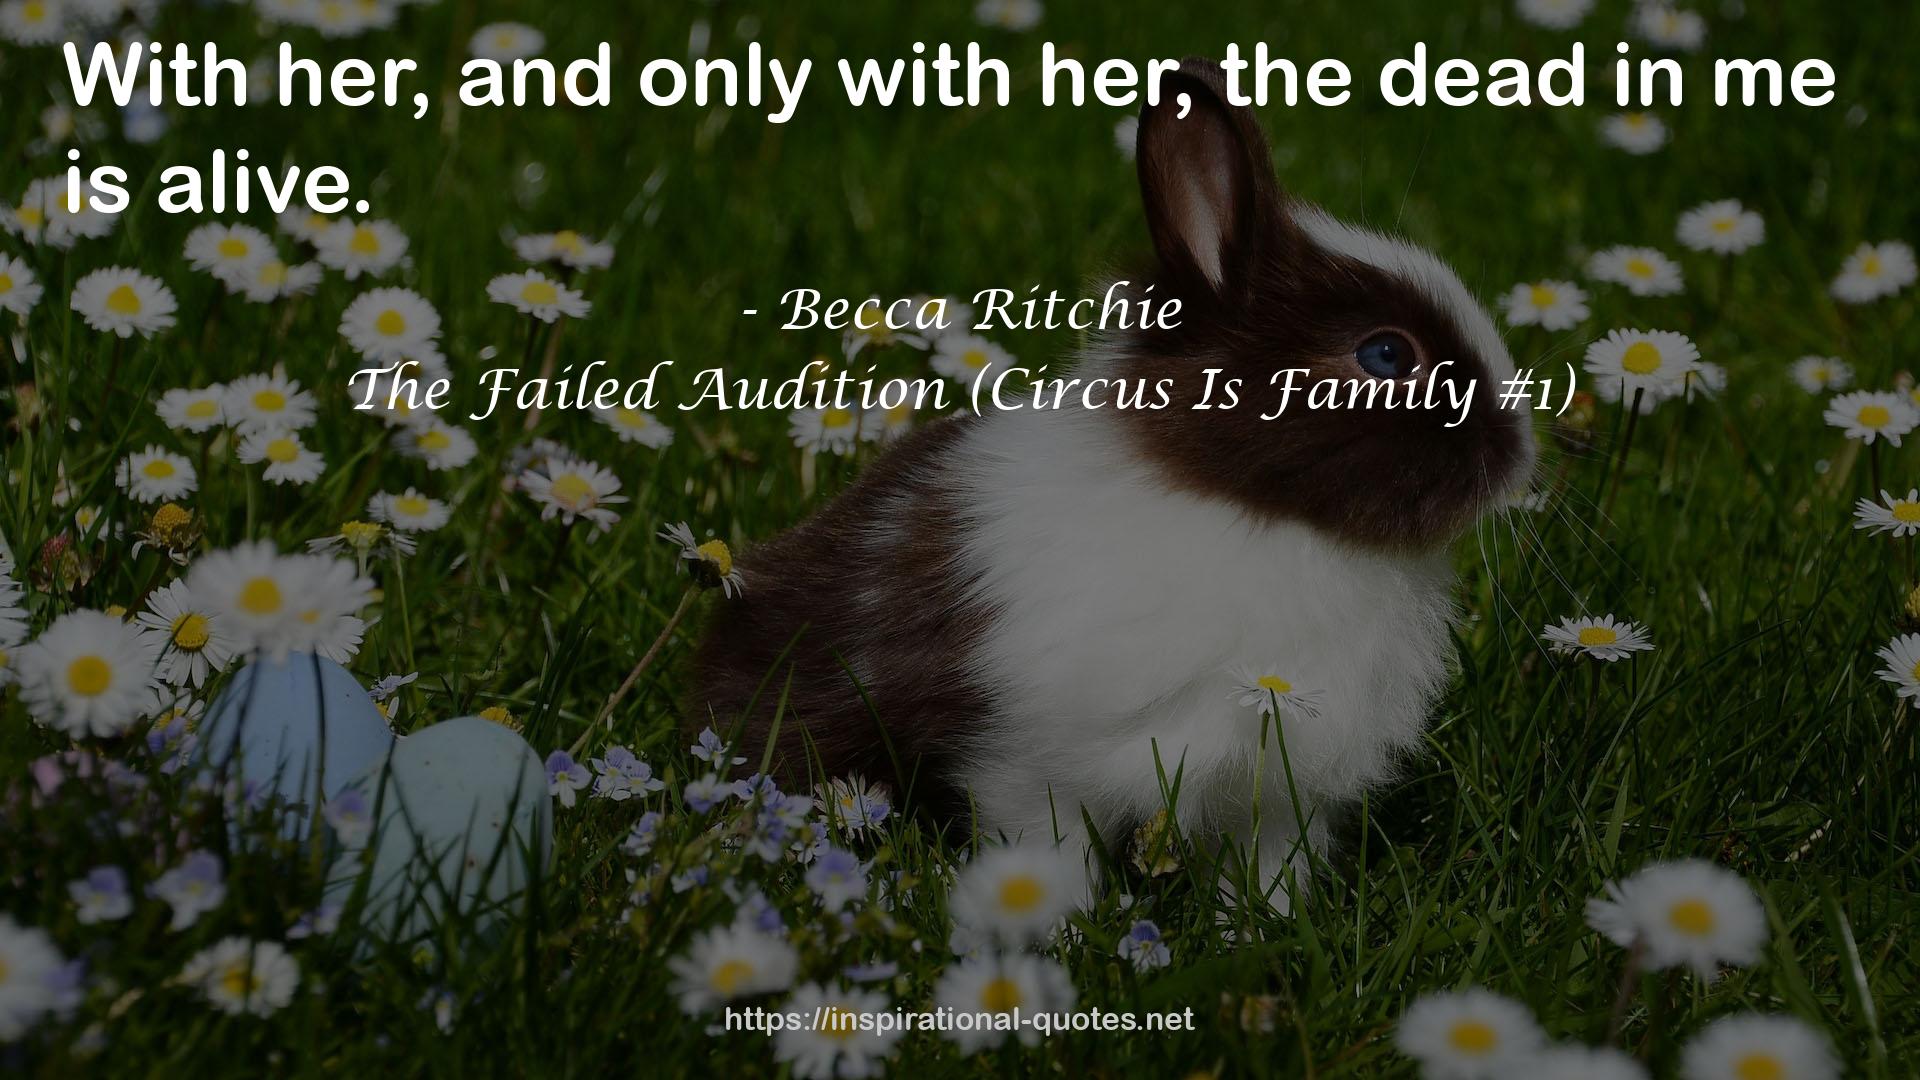 The Failed Audition (Circus Is Family #1) QUOTES